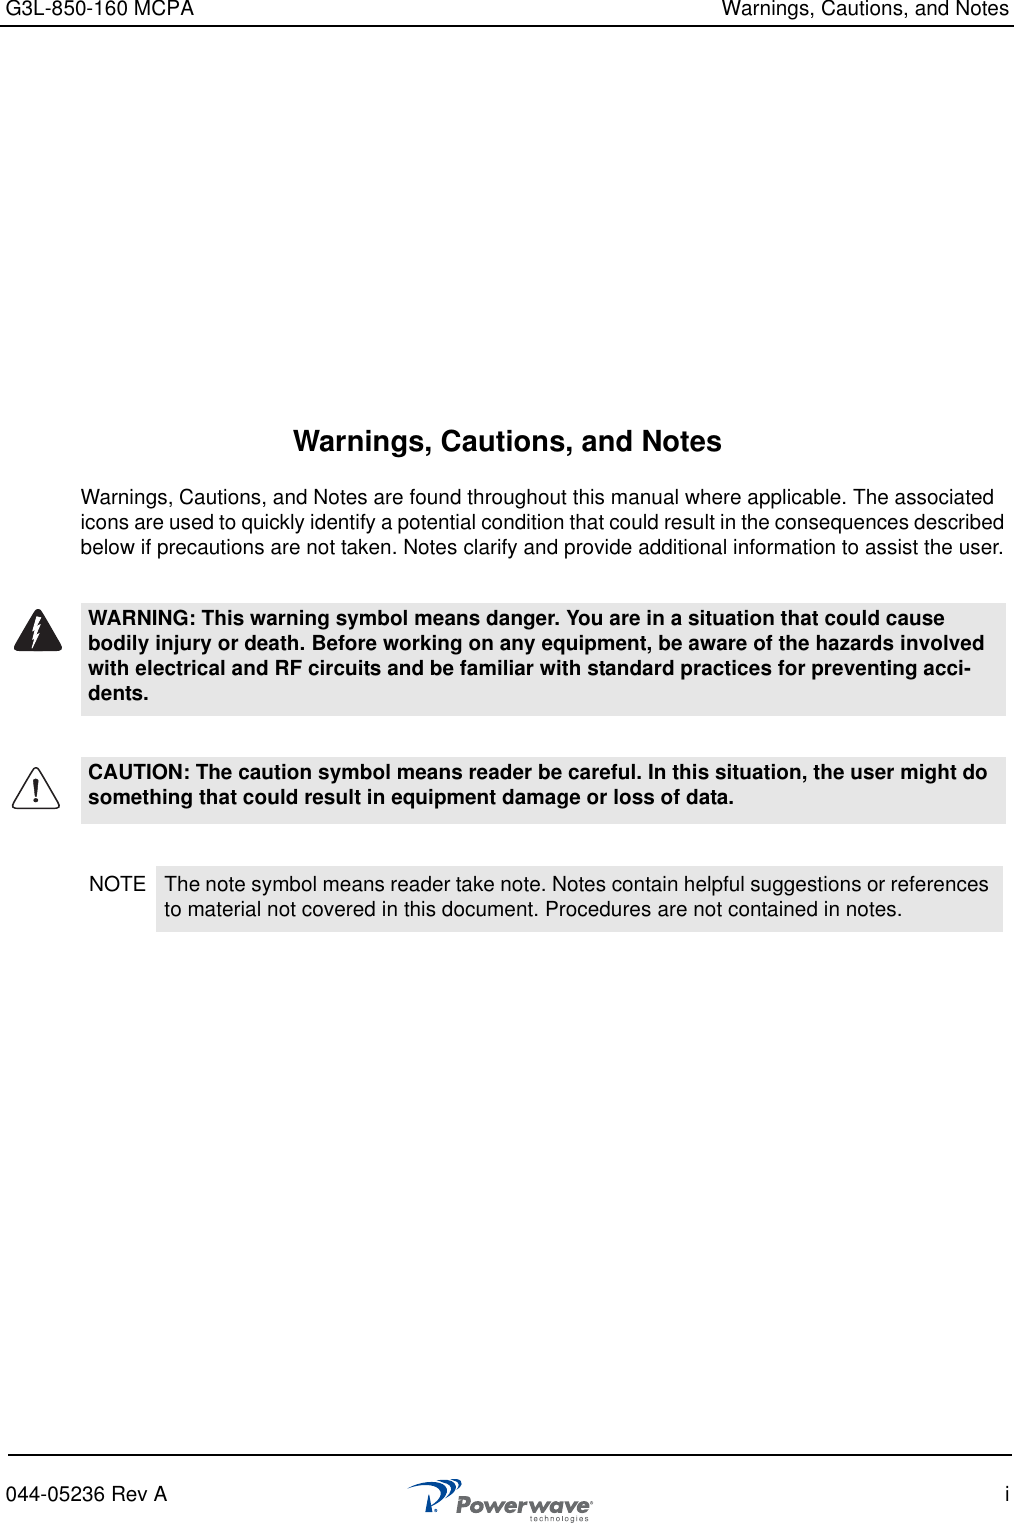 G3L-850-160 MCPA Warnings, Cautions, and Notes044-05236 Rev A iWarnings, Cautions, and NotesWarnings, Cautions, and Notes are found throughout this manual where applicable. The associated icons are used to quickly identify a potential condition that could result in the consequences described below if precautions are not taken. Notes clarify and provide additional information to assist the user.WARNING: This warning symbol means danger. You are in a situation that could cause bodily injury or death. Before working on any equipment, be aware of the hazards involved with electrical and RF circuits and be familiar with standard practices for preventing acci-dents.CAUTION: The caution symbol means reader be careful. In this situation, the user might do something that could result in equipment damage or loss of data. NOTE The note symbol means reader take note. Notes contain helpful suggestions or references to material not covered in this document. Procedures are not contained in notes. 